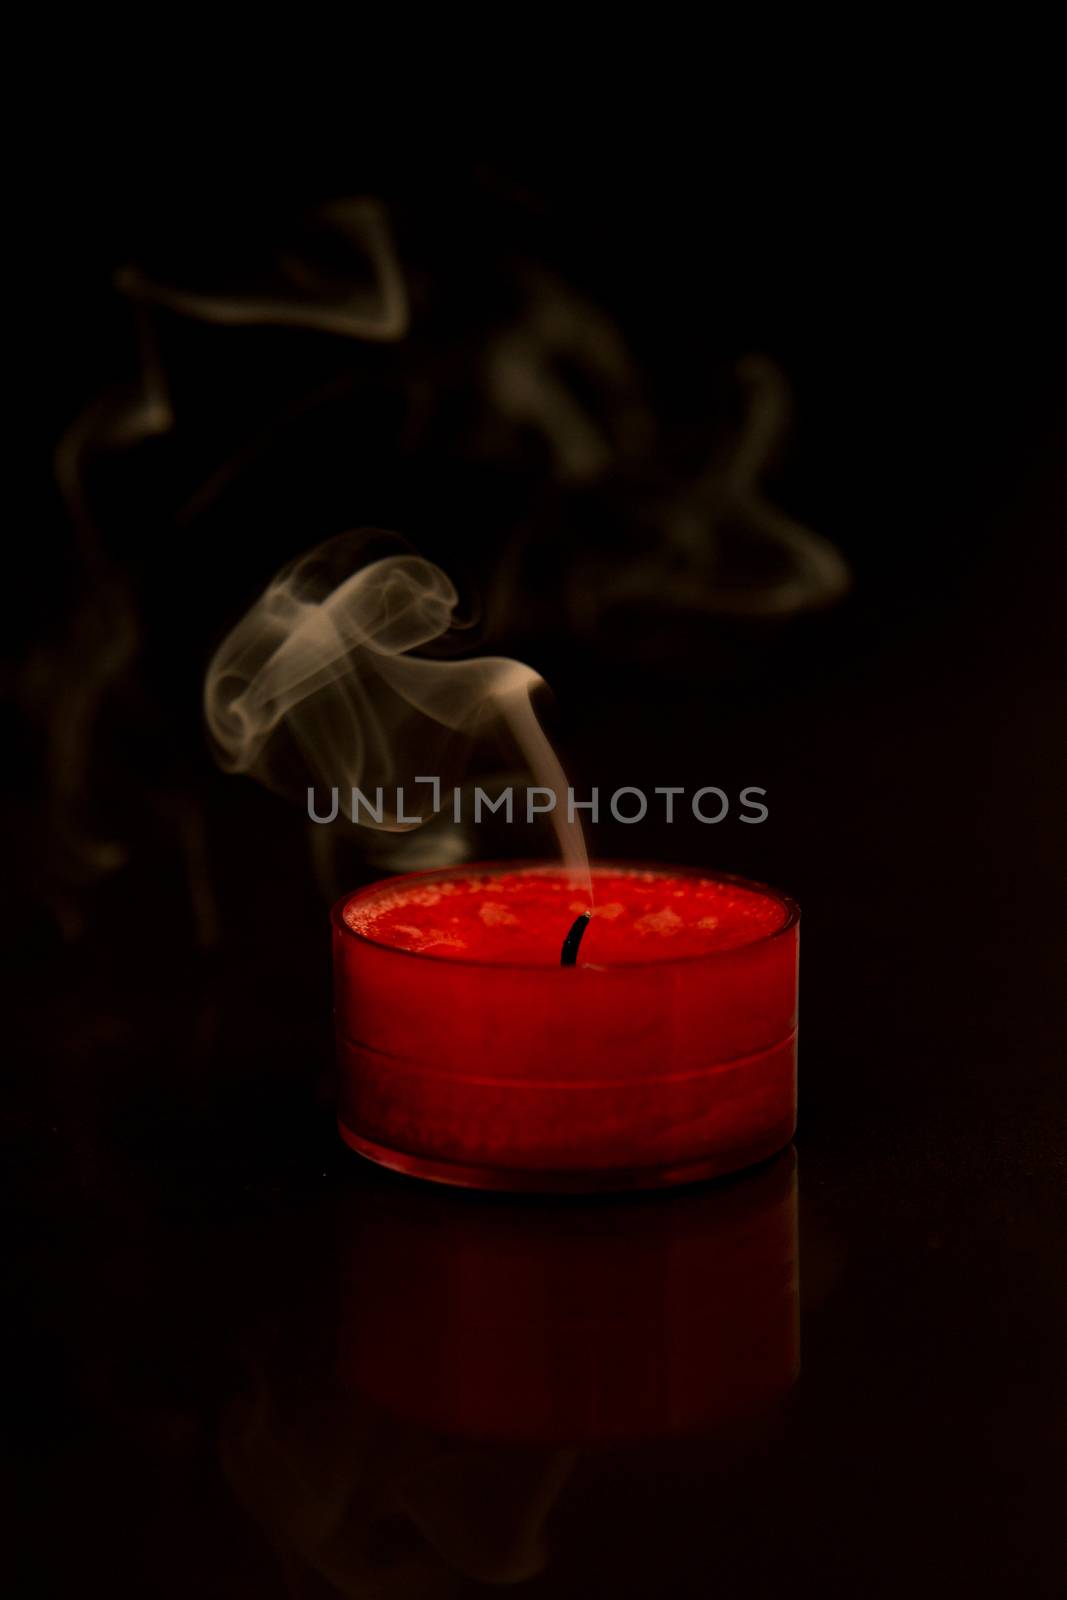 Burnt out candle by Wavebreakmedia